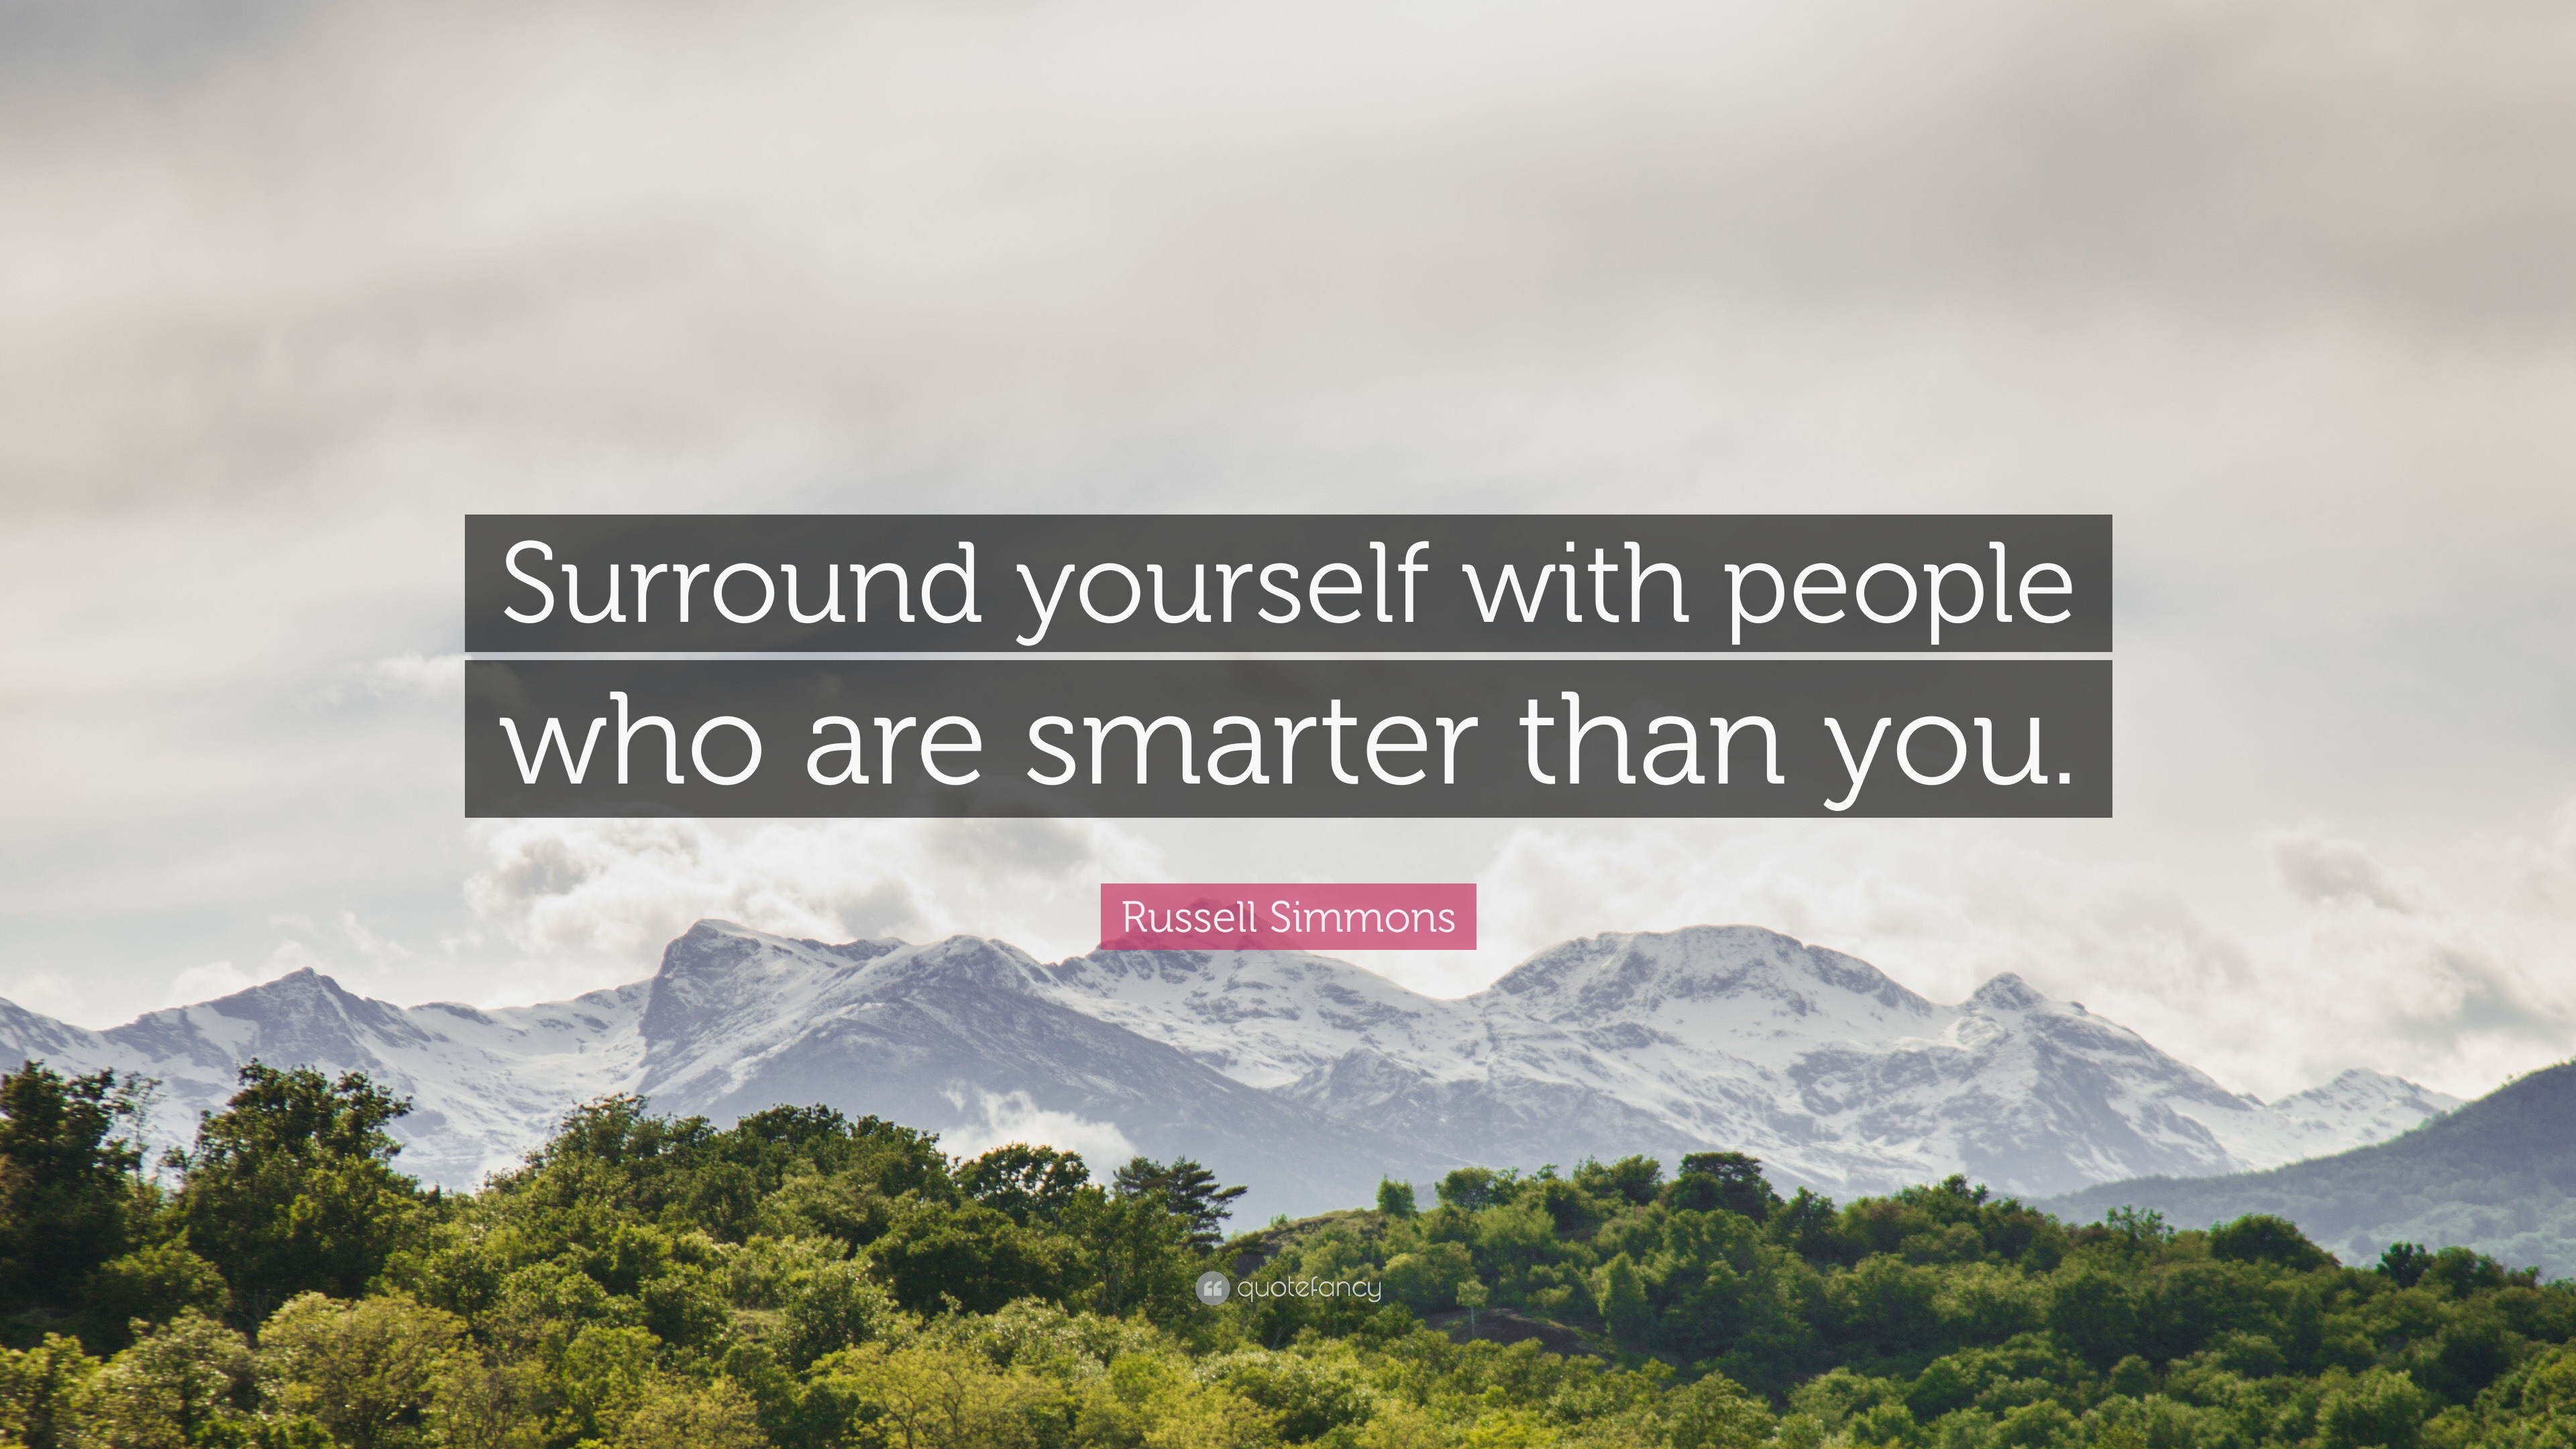 Russell Simmons Quote: "Surround yourself with people who ar